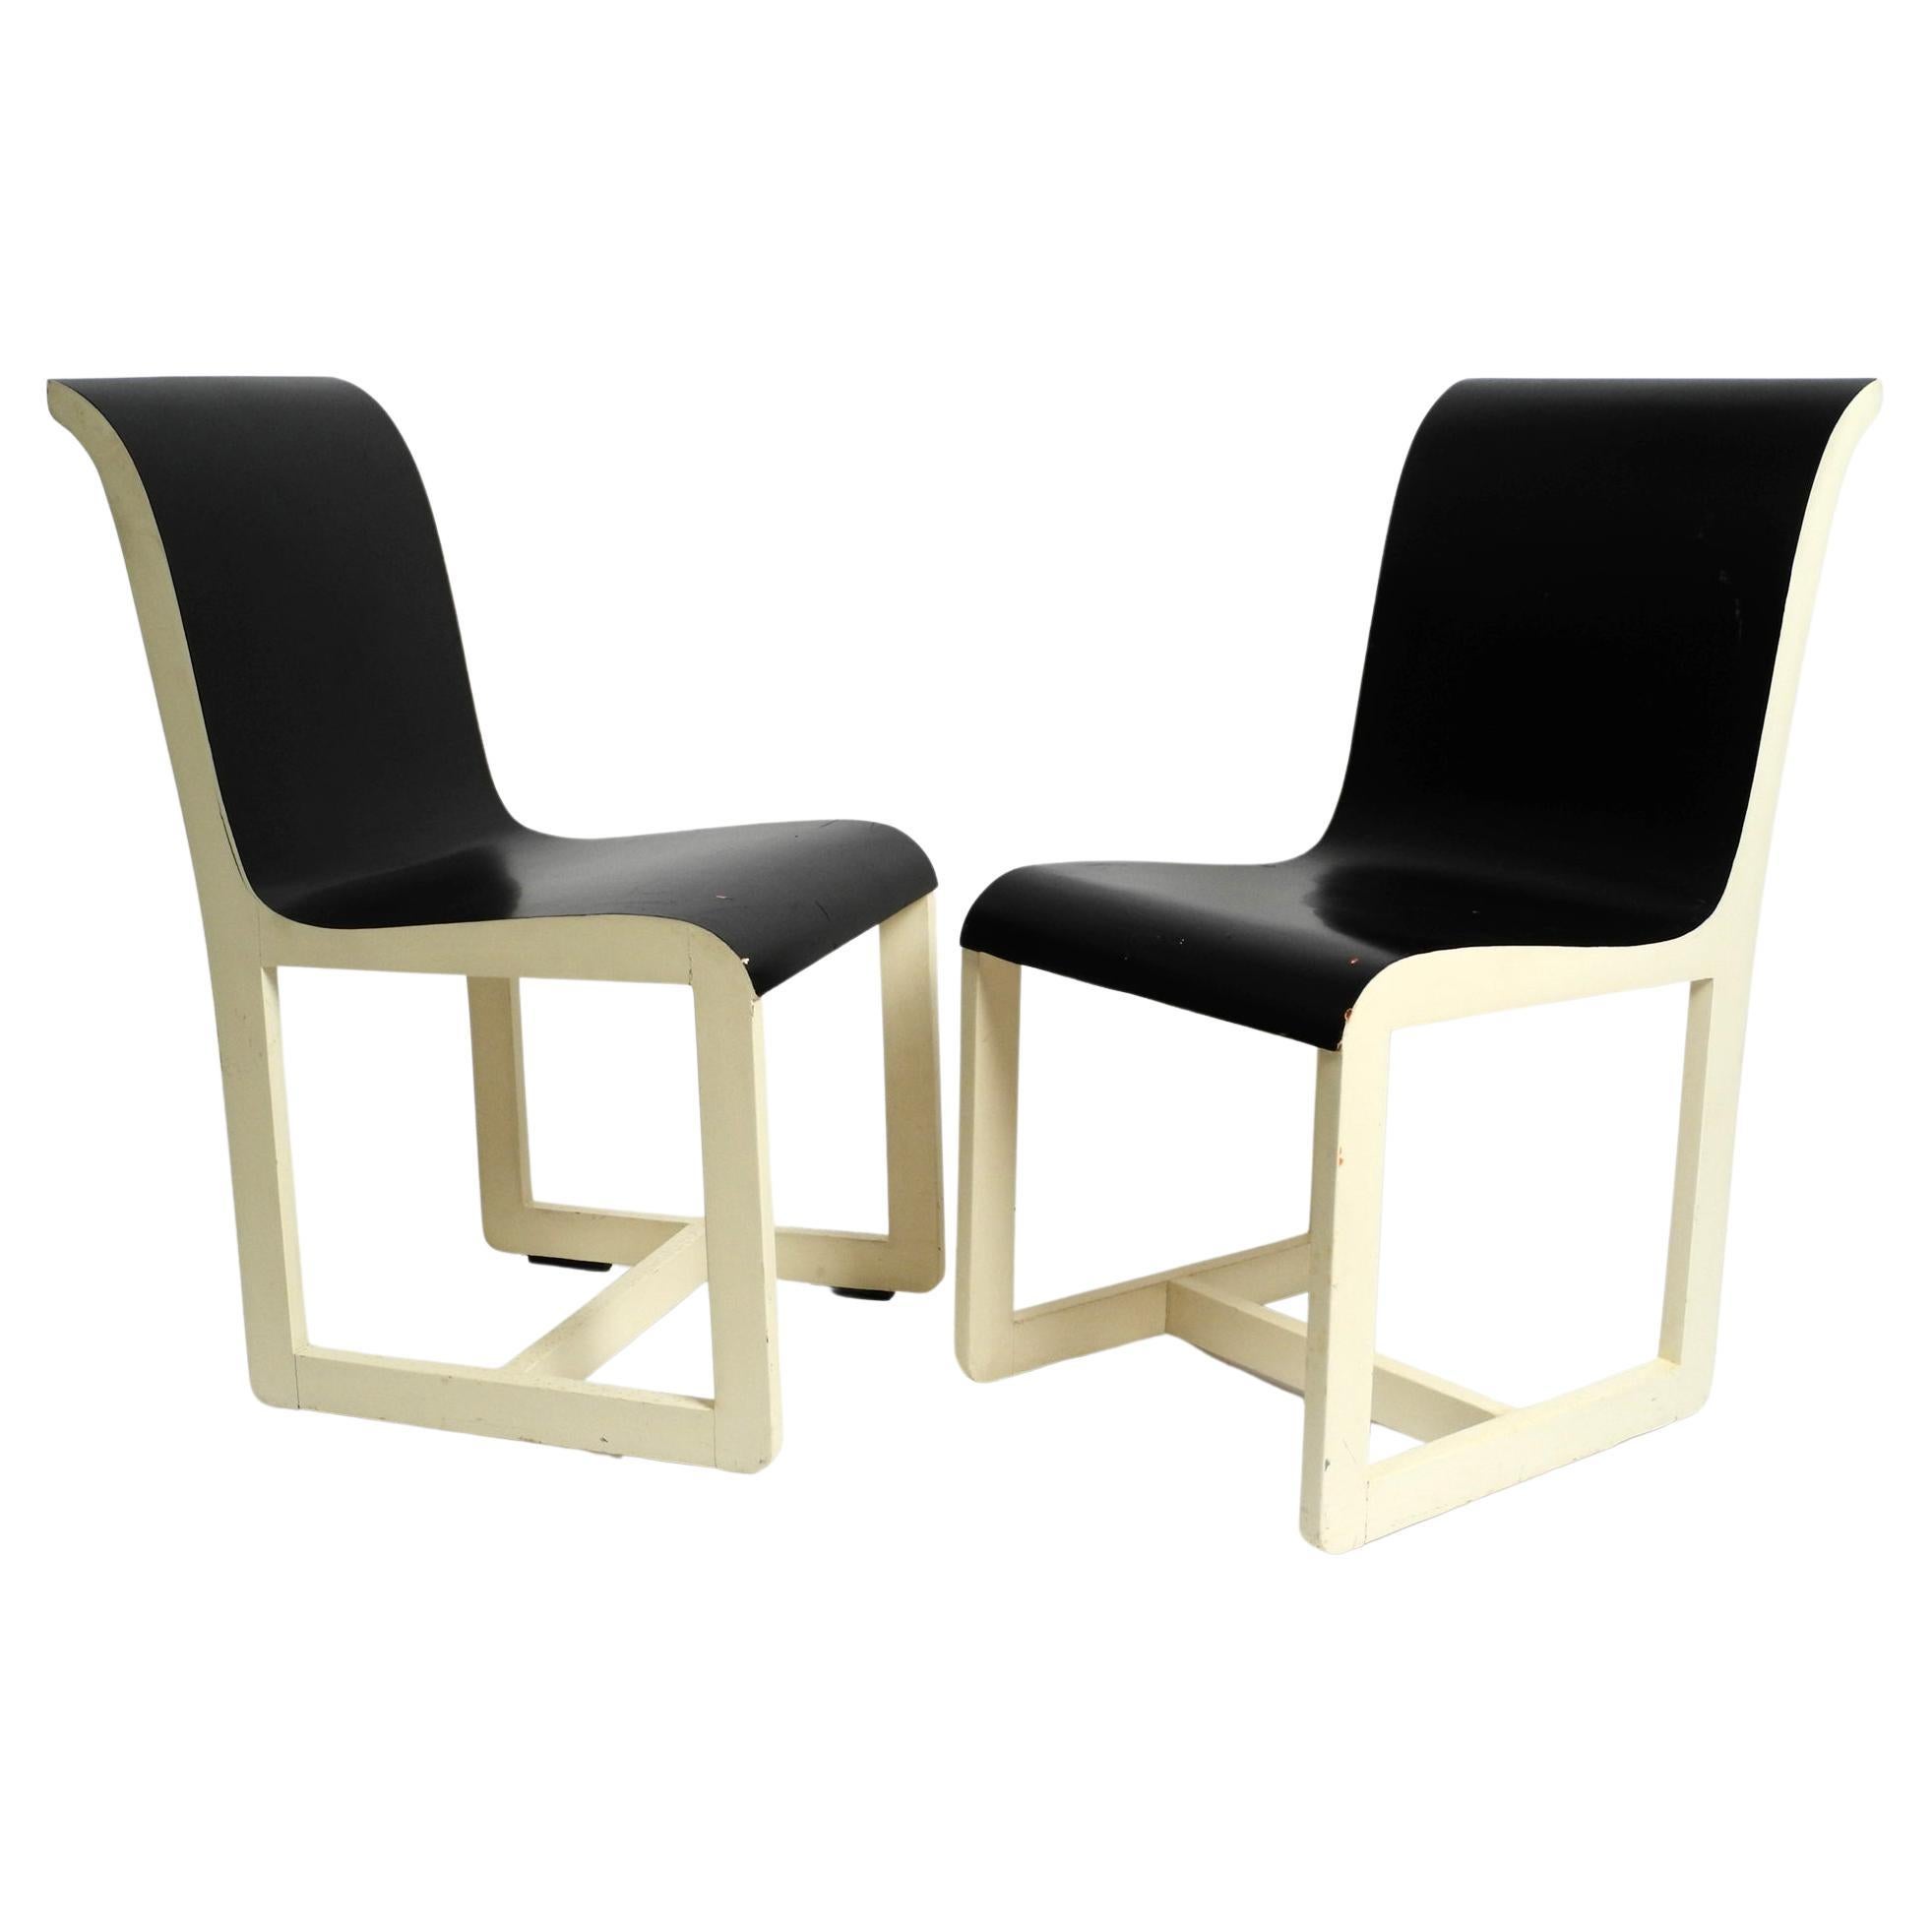 Two original 1930s wooden chairs by the well-known Bauhaus student Peter Keler For Sale